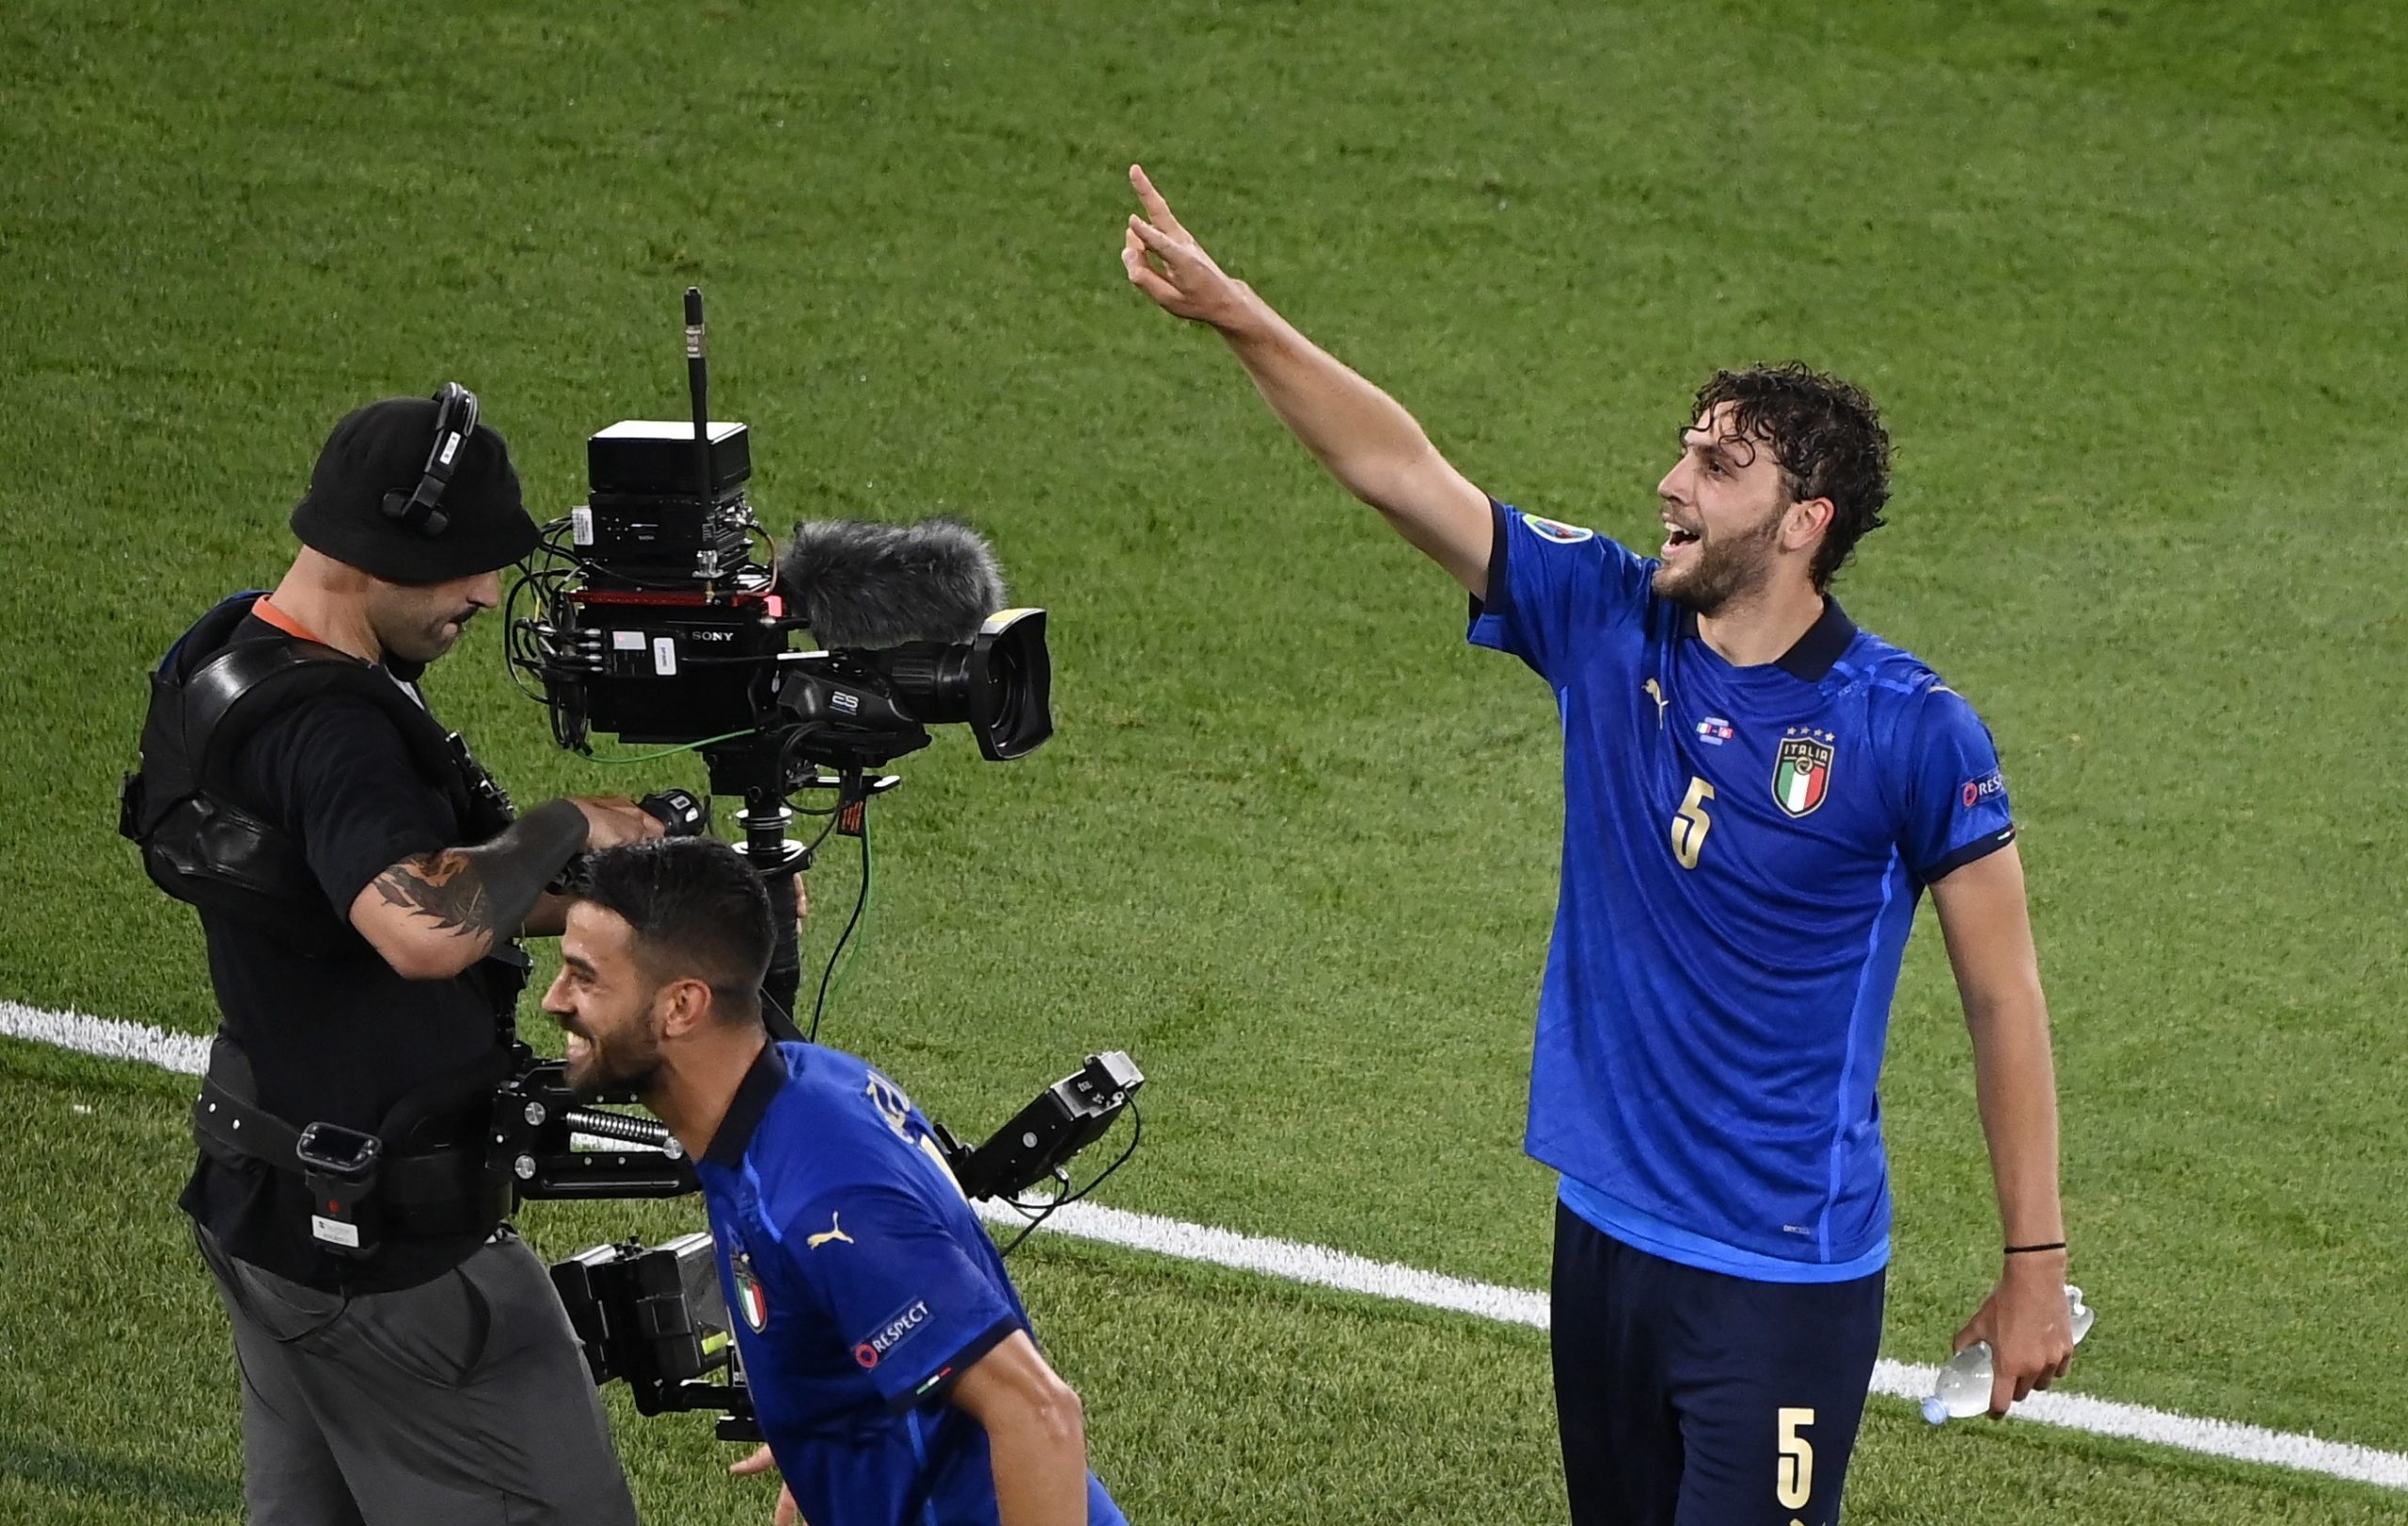 epa09277902 Manuel Locatelli of Italy celebrates after scoring the 1-0 goal during the UEFA EURO 2020 group A preliminary round soccer match between Italy and Switzerland in Rome, Italy, 16 June 2021.  EPA/Riccardo Antimiani / POOL (RESTRICTIONS: For editorial news reporting purposes only. Images must appear as still images and must not emulate match action video footage. Photographs published in online publications shall have an interval of at least 20 seconds between the posting.)